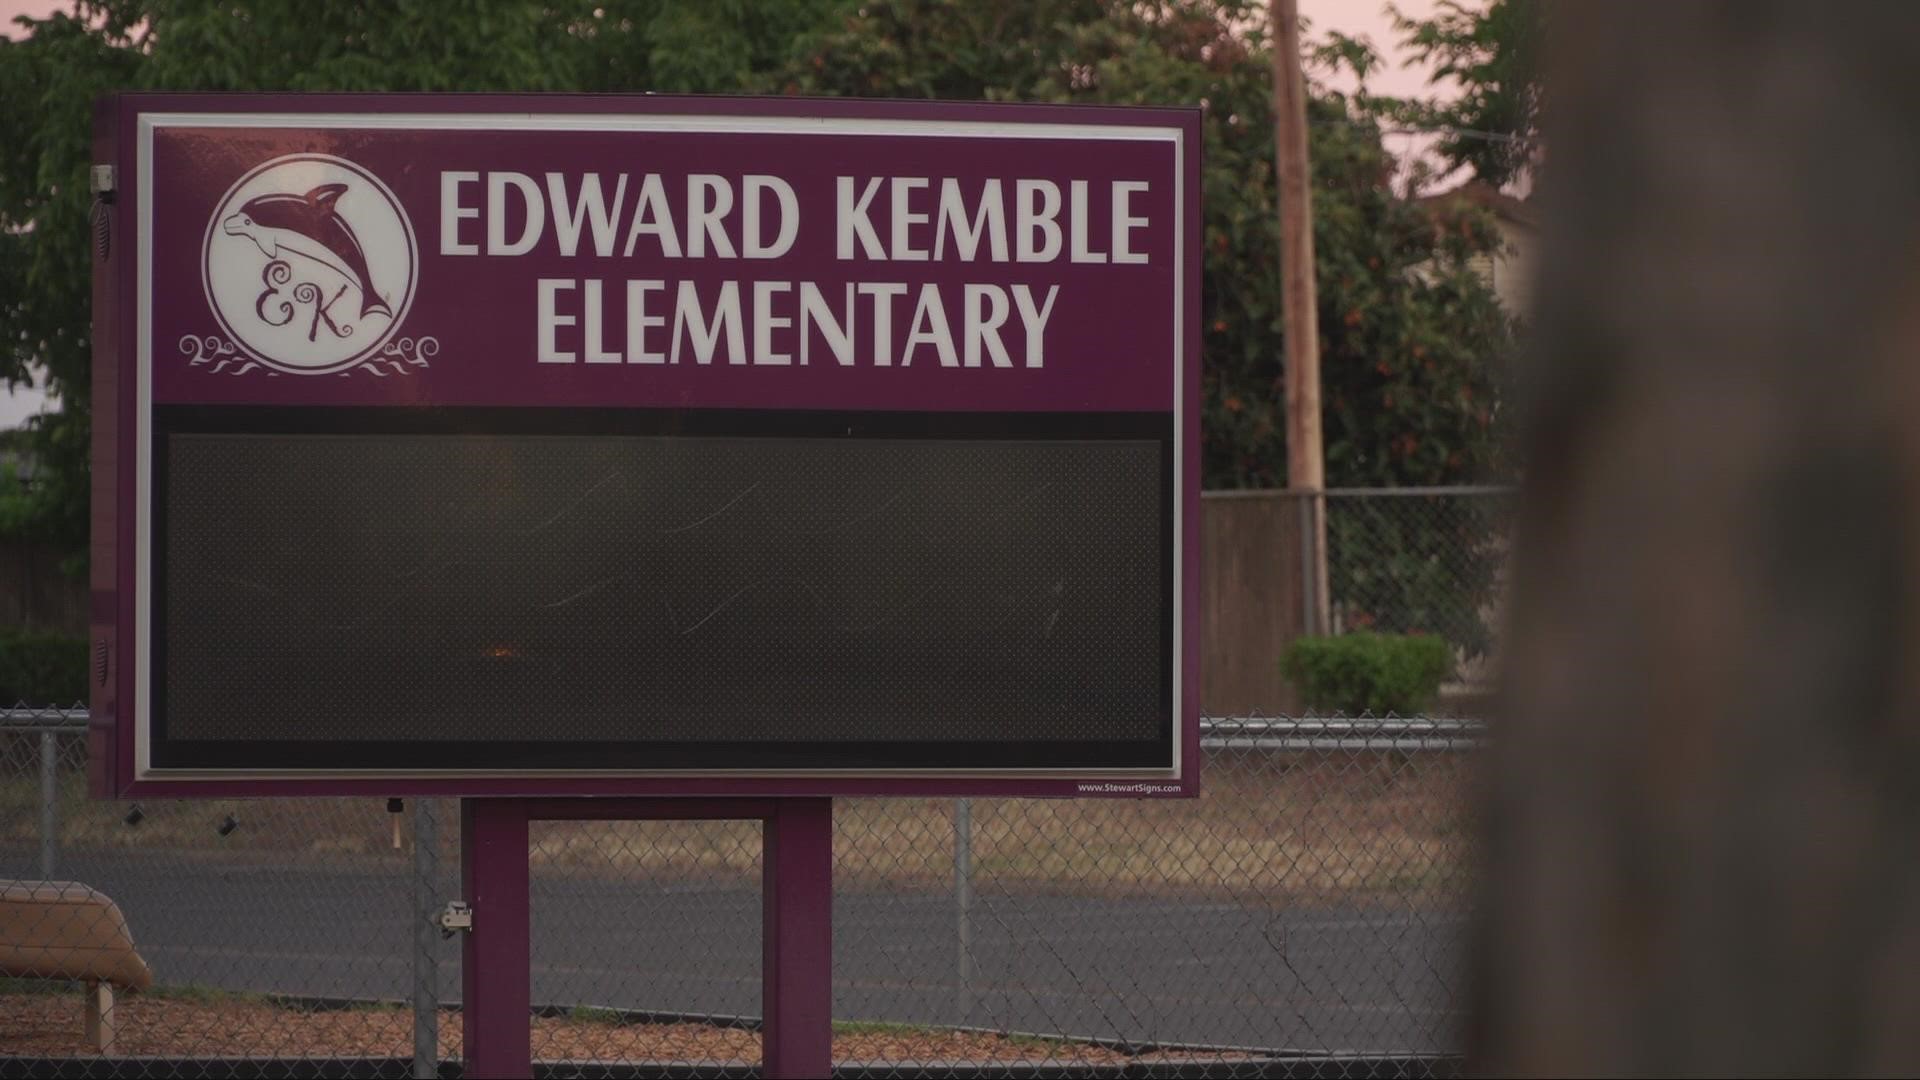 On the same day as one of the deadliest school shootings, a gun was found in a 2nd grader's desk in Sacramento and a Roseville student had a list of people to hurt.